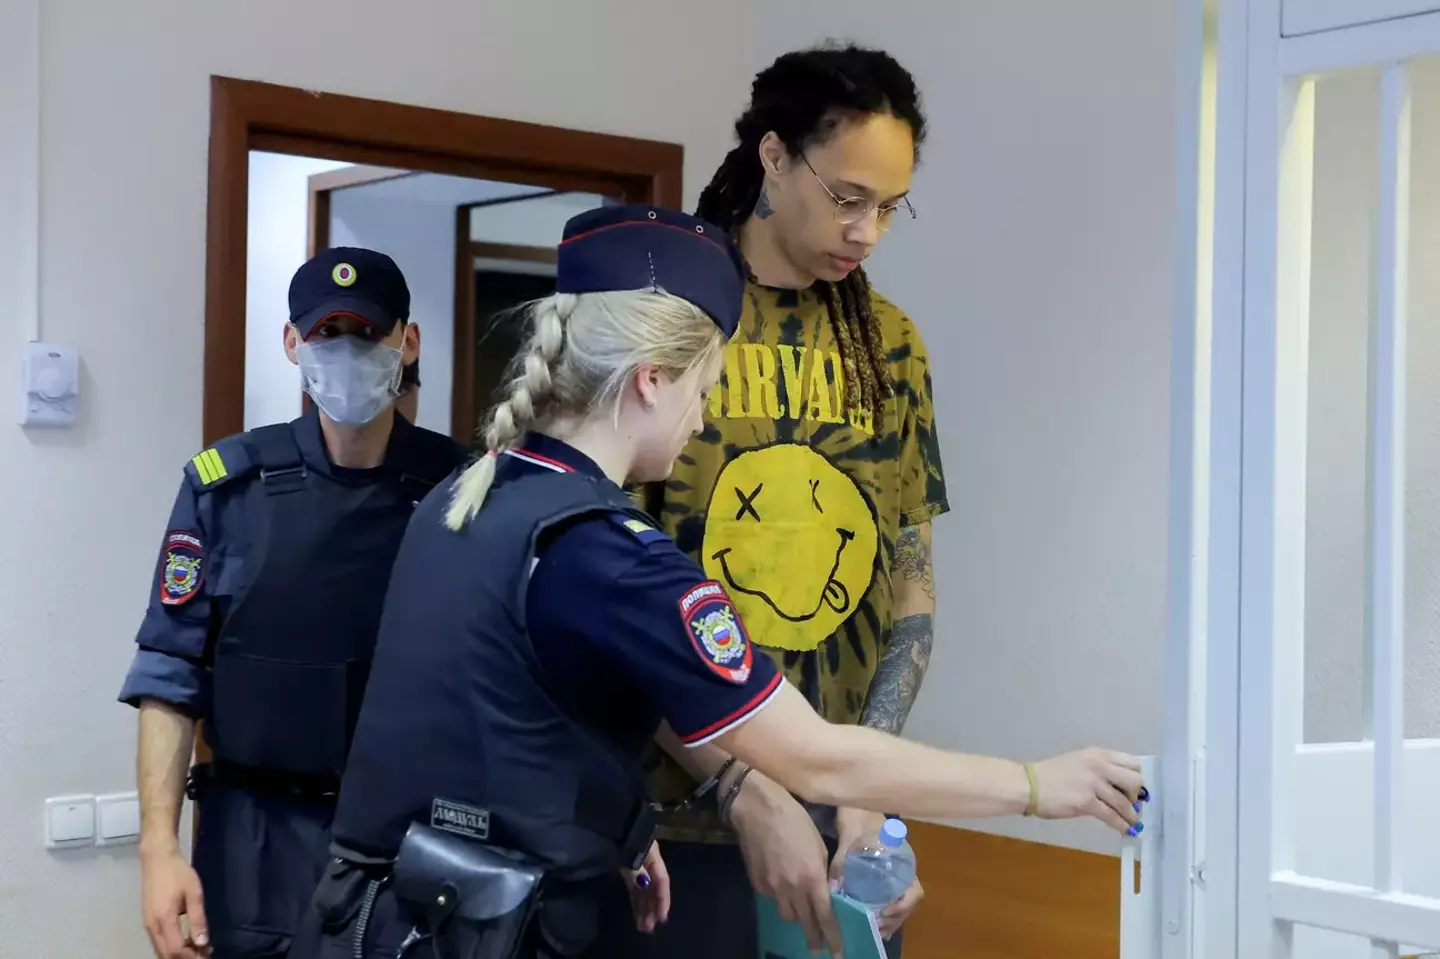 Brittney Griner has been found guilty of drug possession and smuggling in Russia.